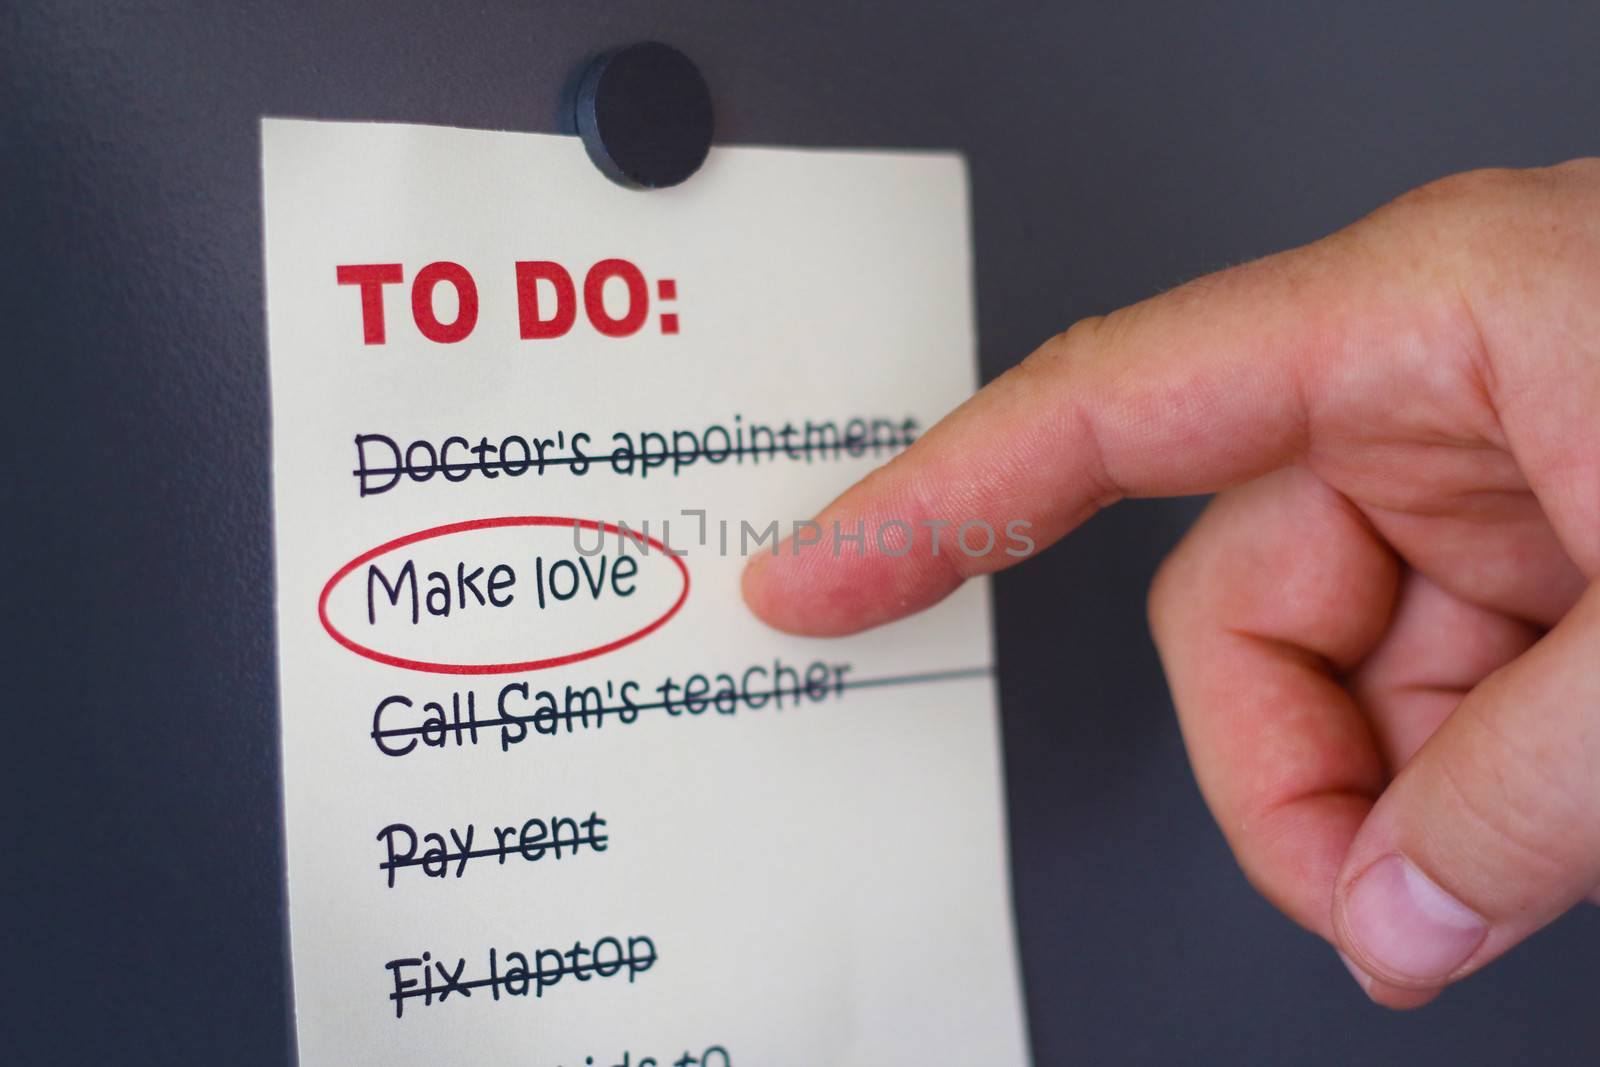 Conceptual image of making love a priority with a male finger pointing to a To Do List on which all things have been crossed out except Make Love which is ringed in red